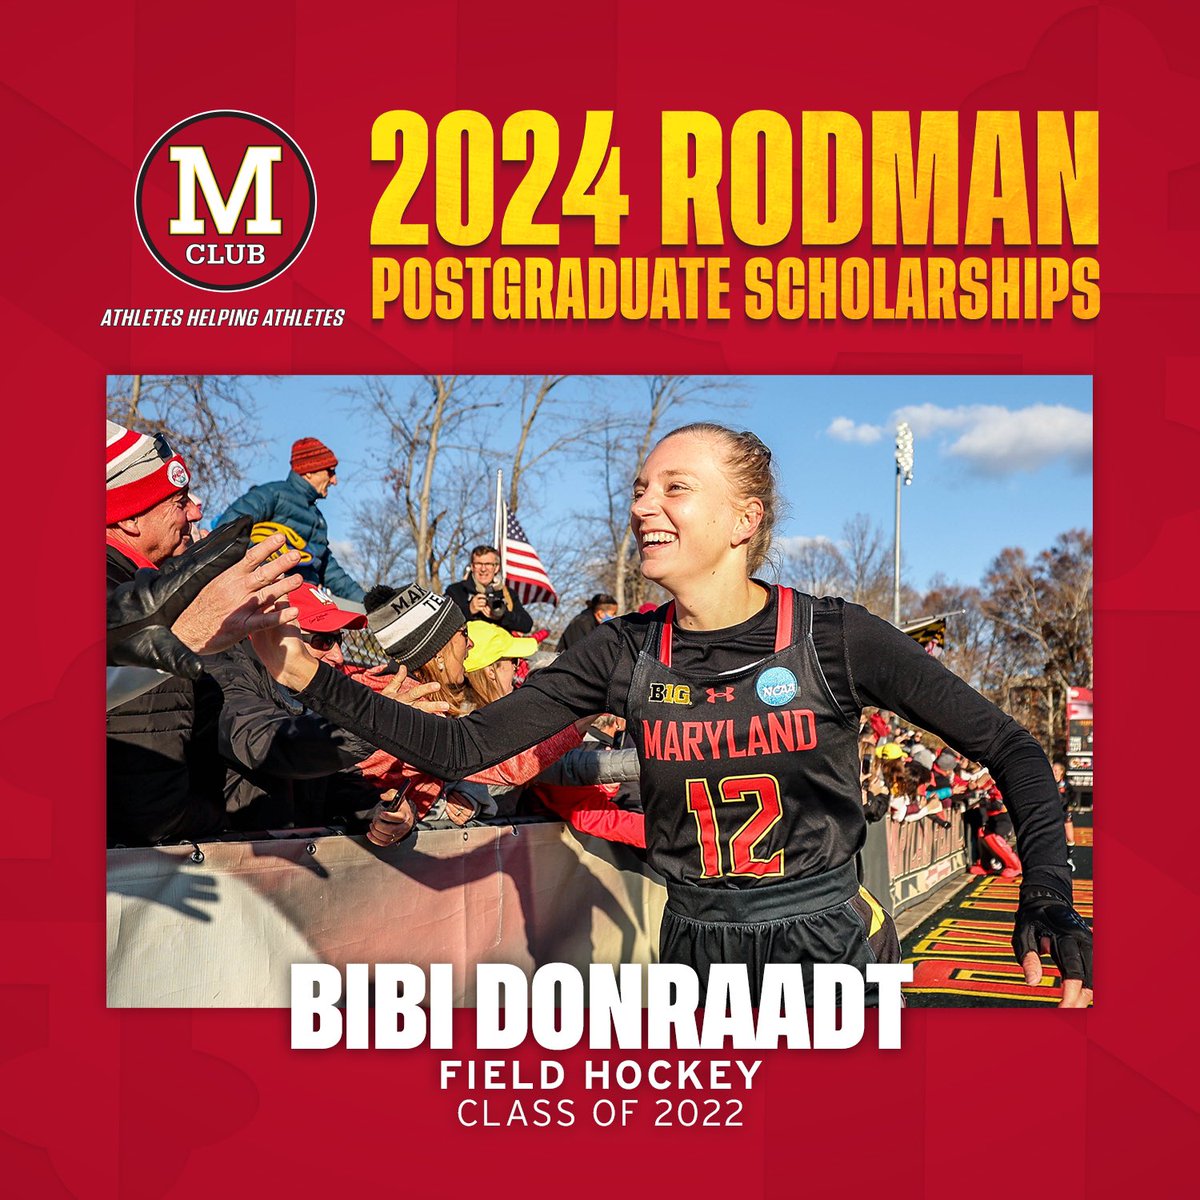 Congratulations to the ELEVEN student-athletes that were awarded M Club Rodman Postgraduate Scholarships! The M Club is extremely thankful to all of our alumni who make this possible ❤️